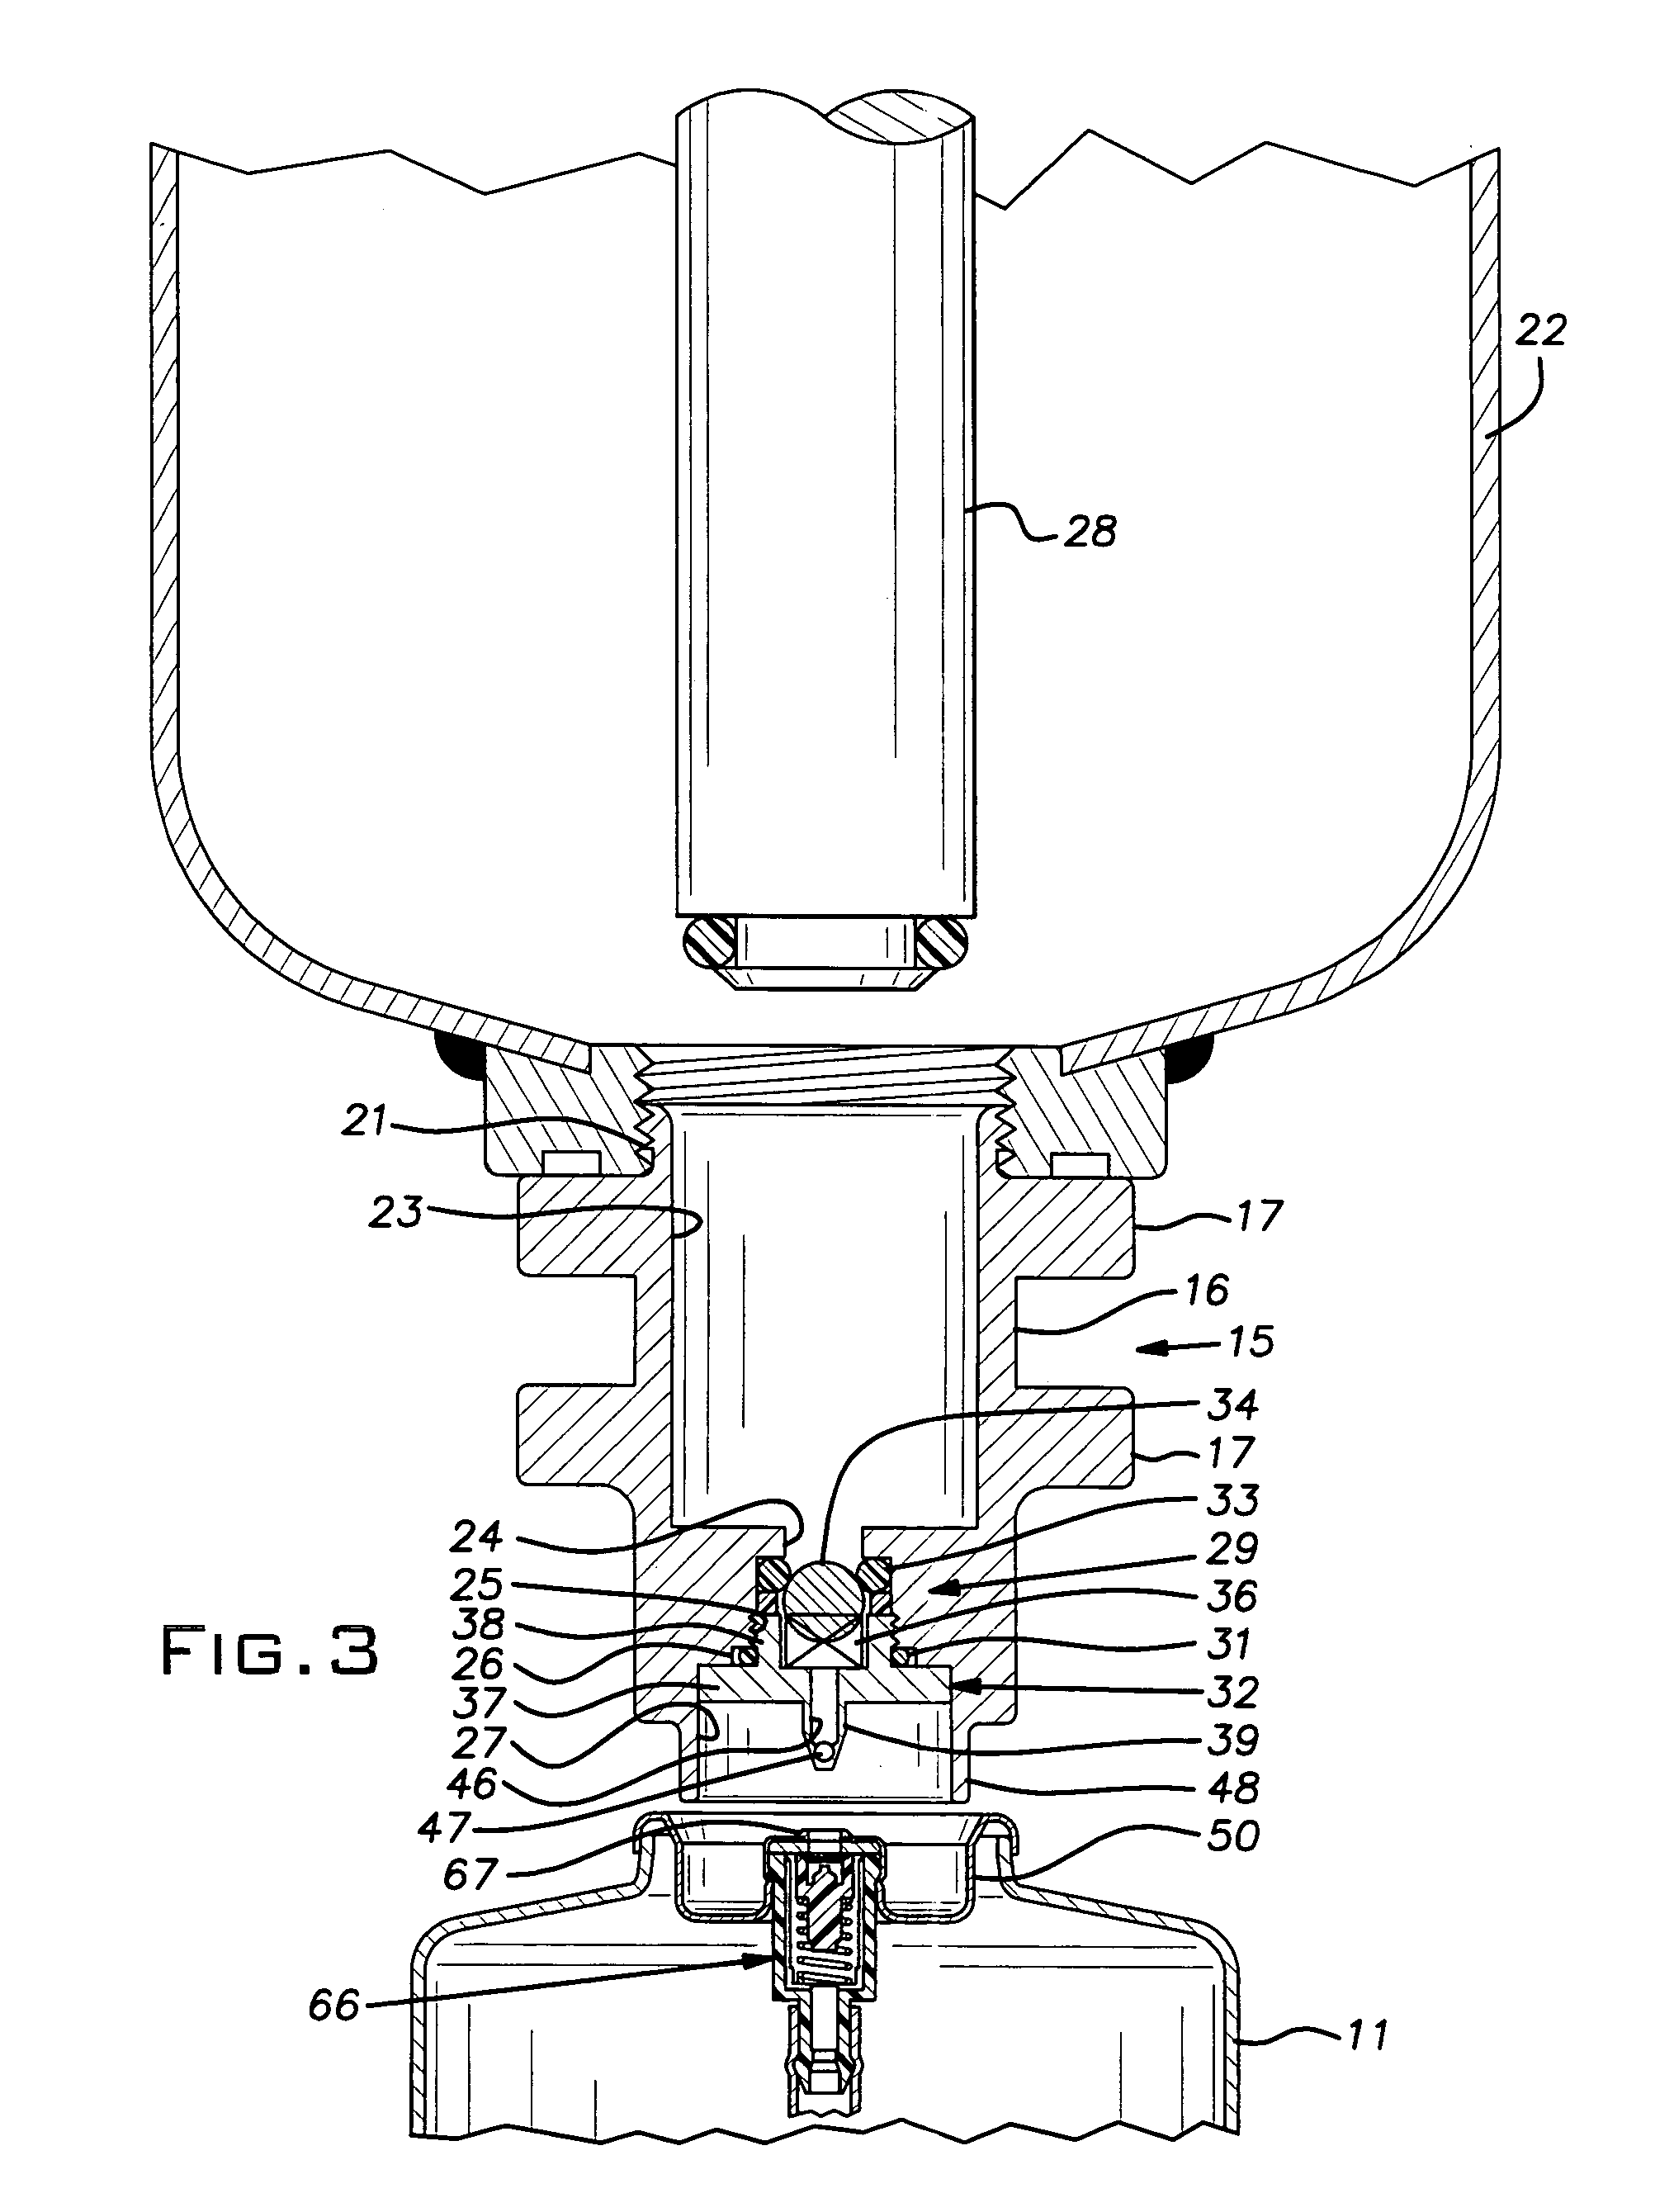 Apparatus for filling charged aerosol cans